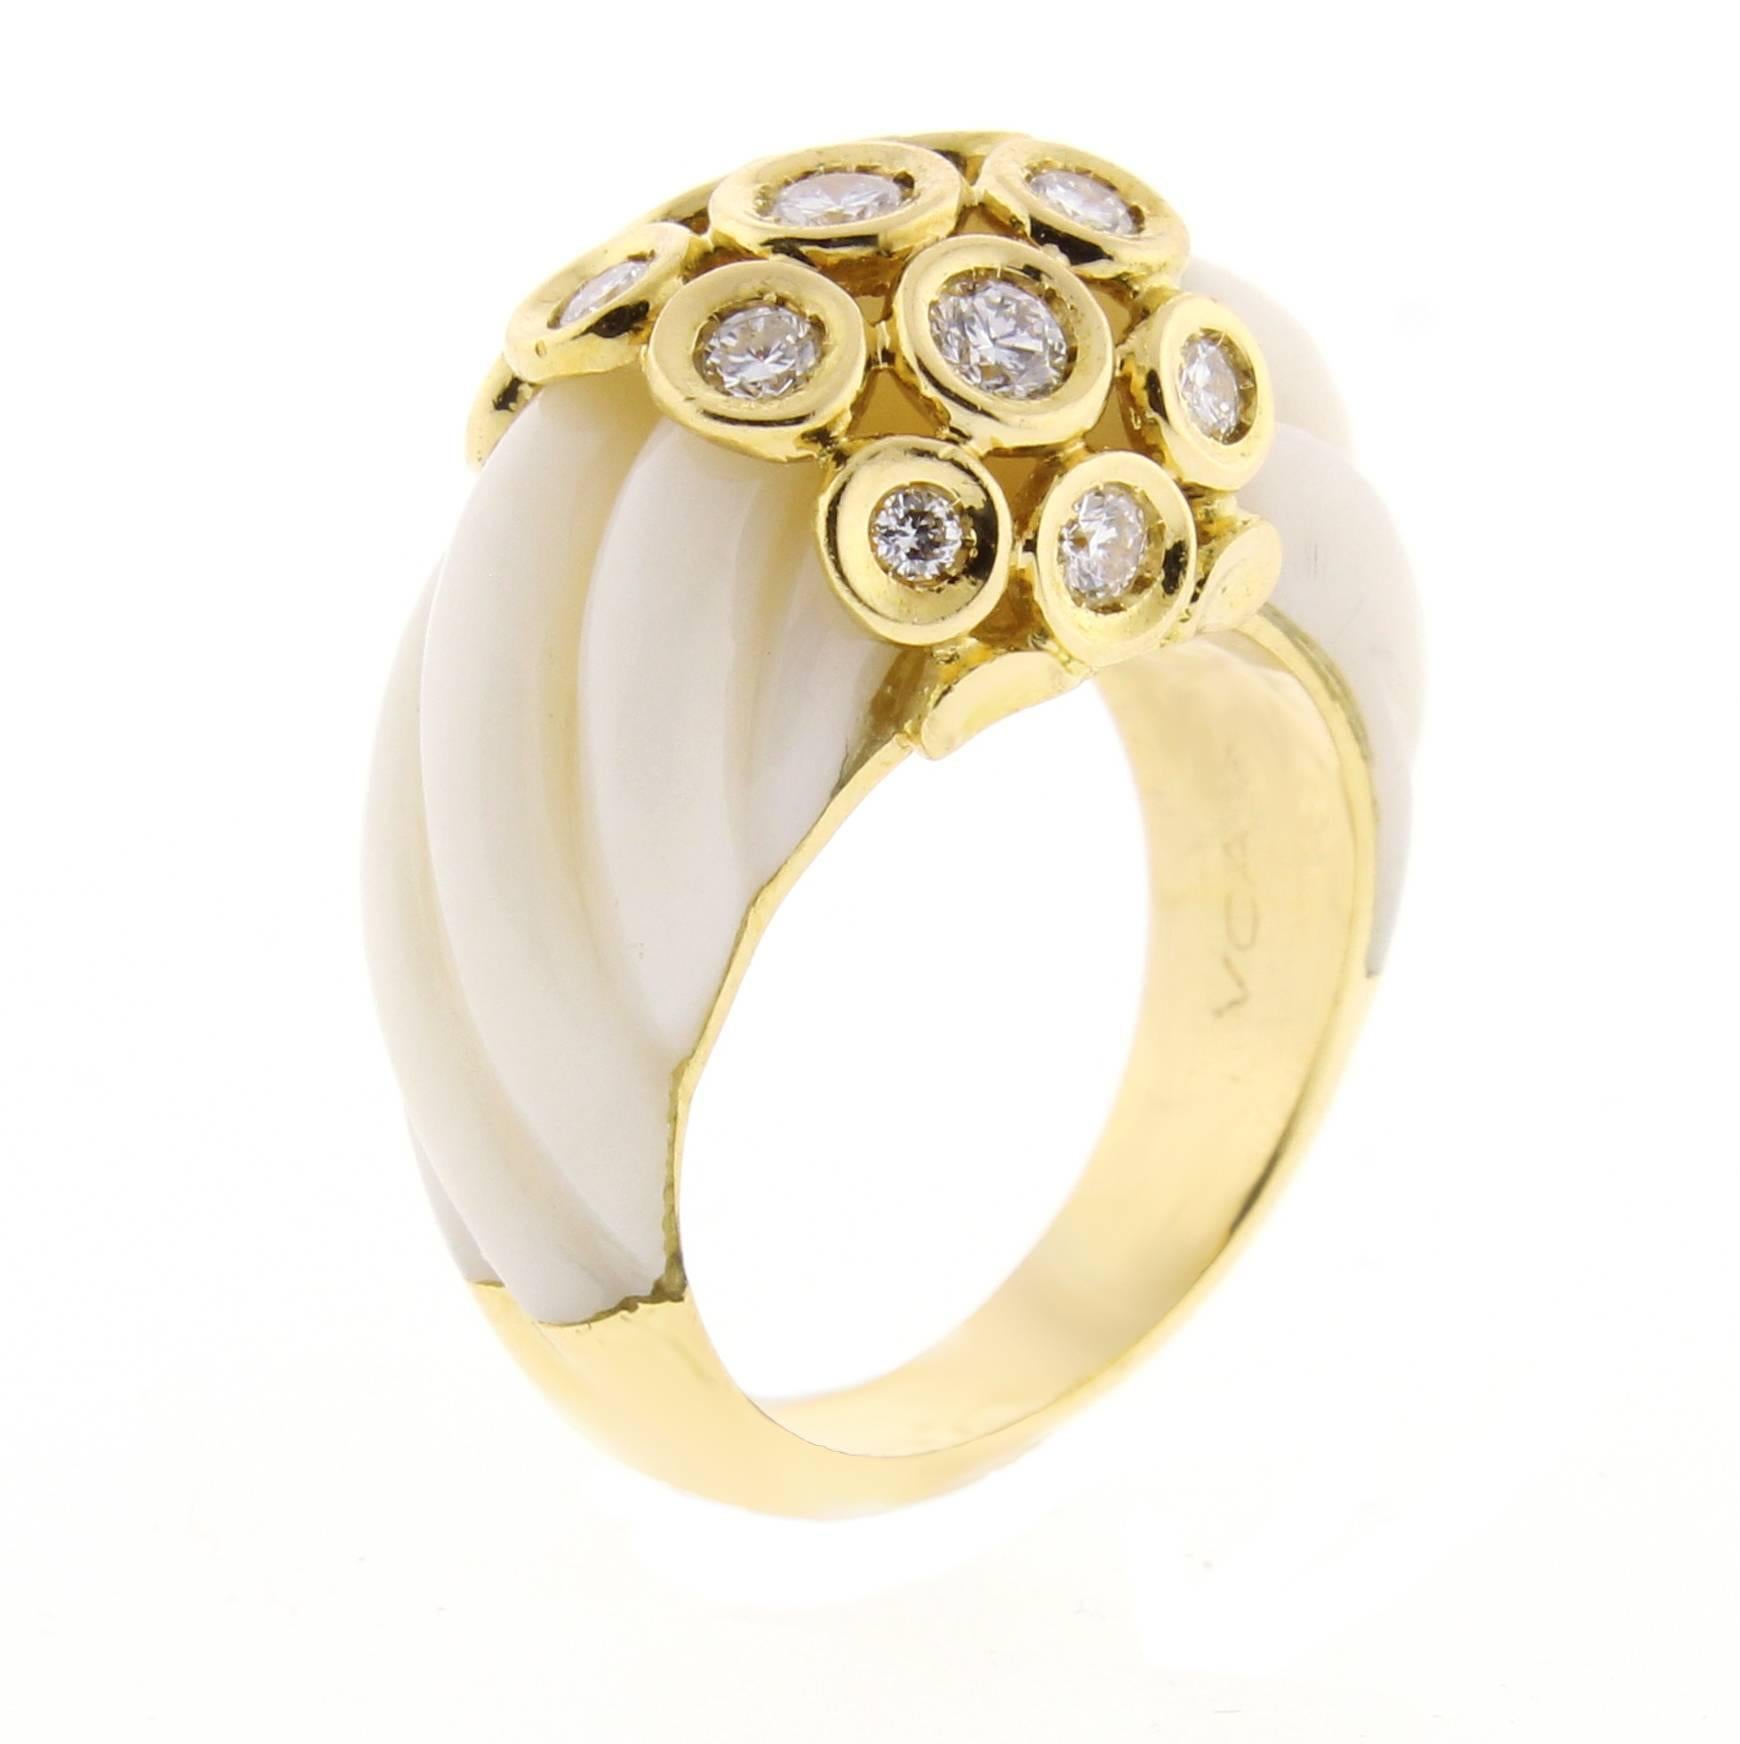 Wonderful 1970s Van Cleef & Arpels ring. This 18 karat yellow gold ring features 13 brilliant diamonds weighing .45 carats and two sections of carved  angle skin coral. The top of the ring is 1/2 inch wide. Size 5. 
